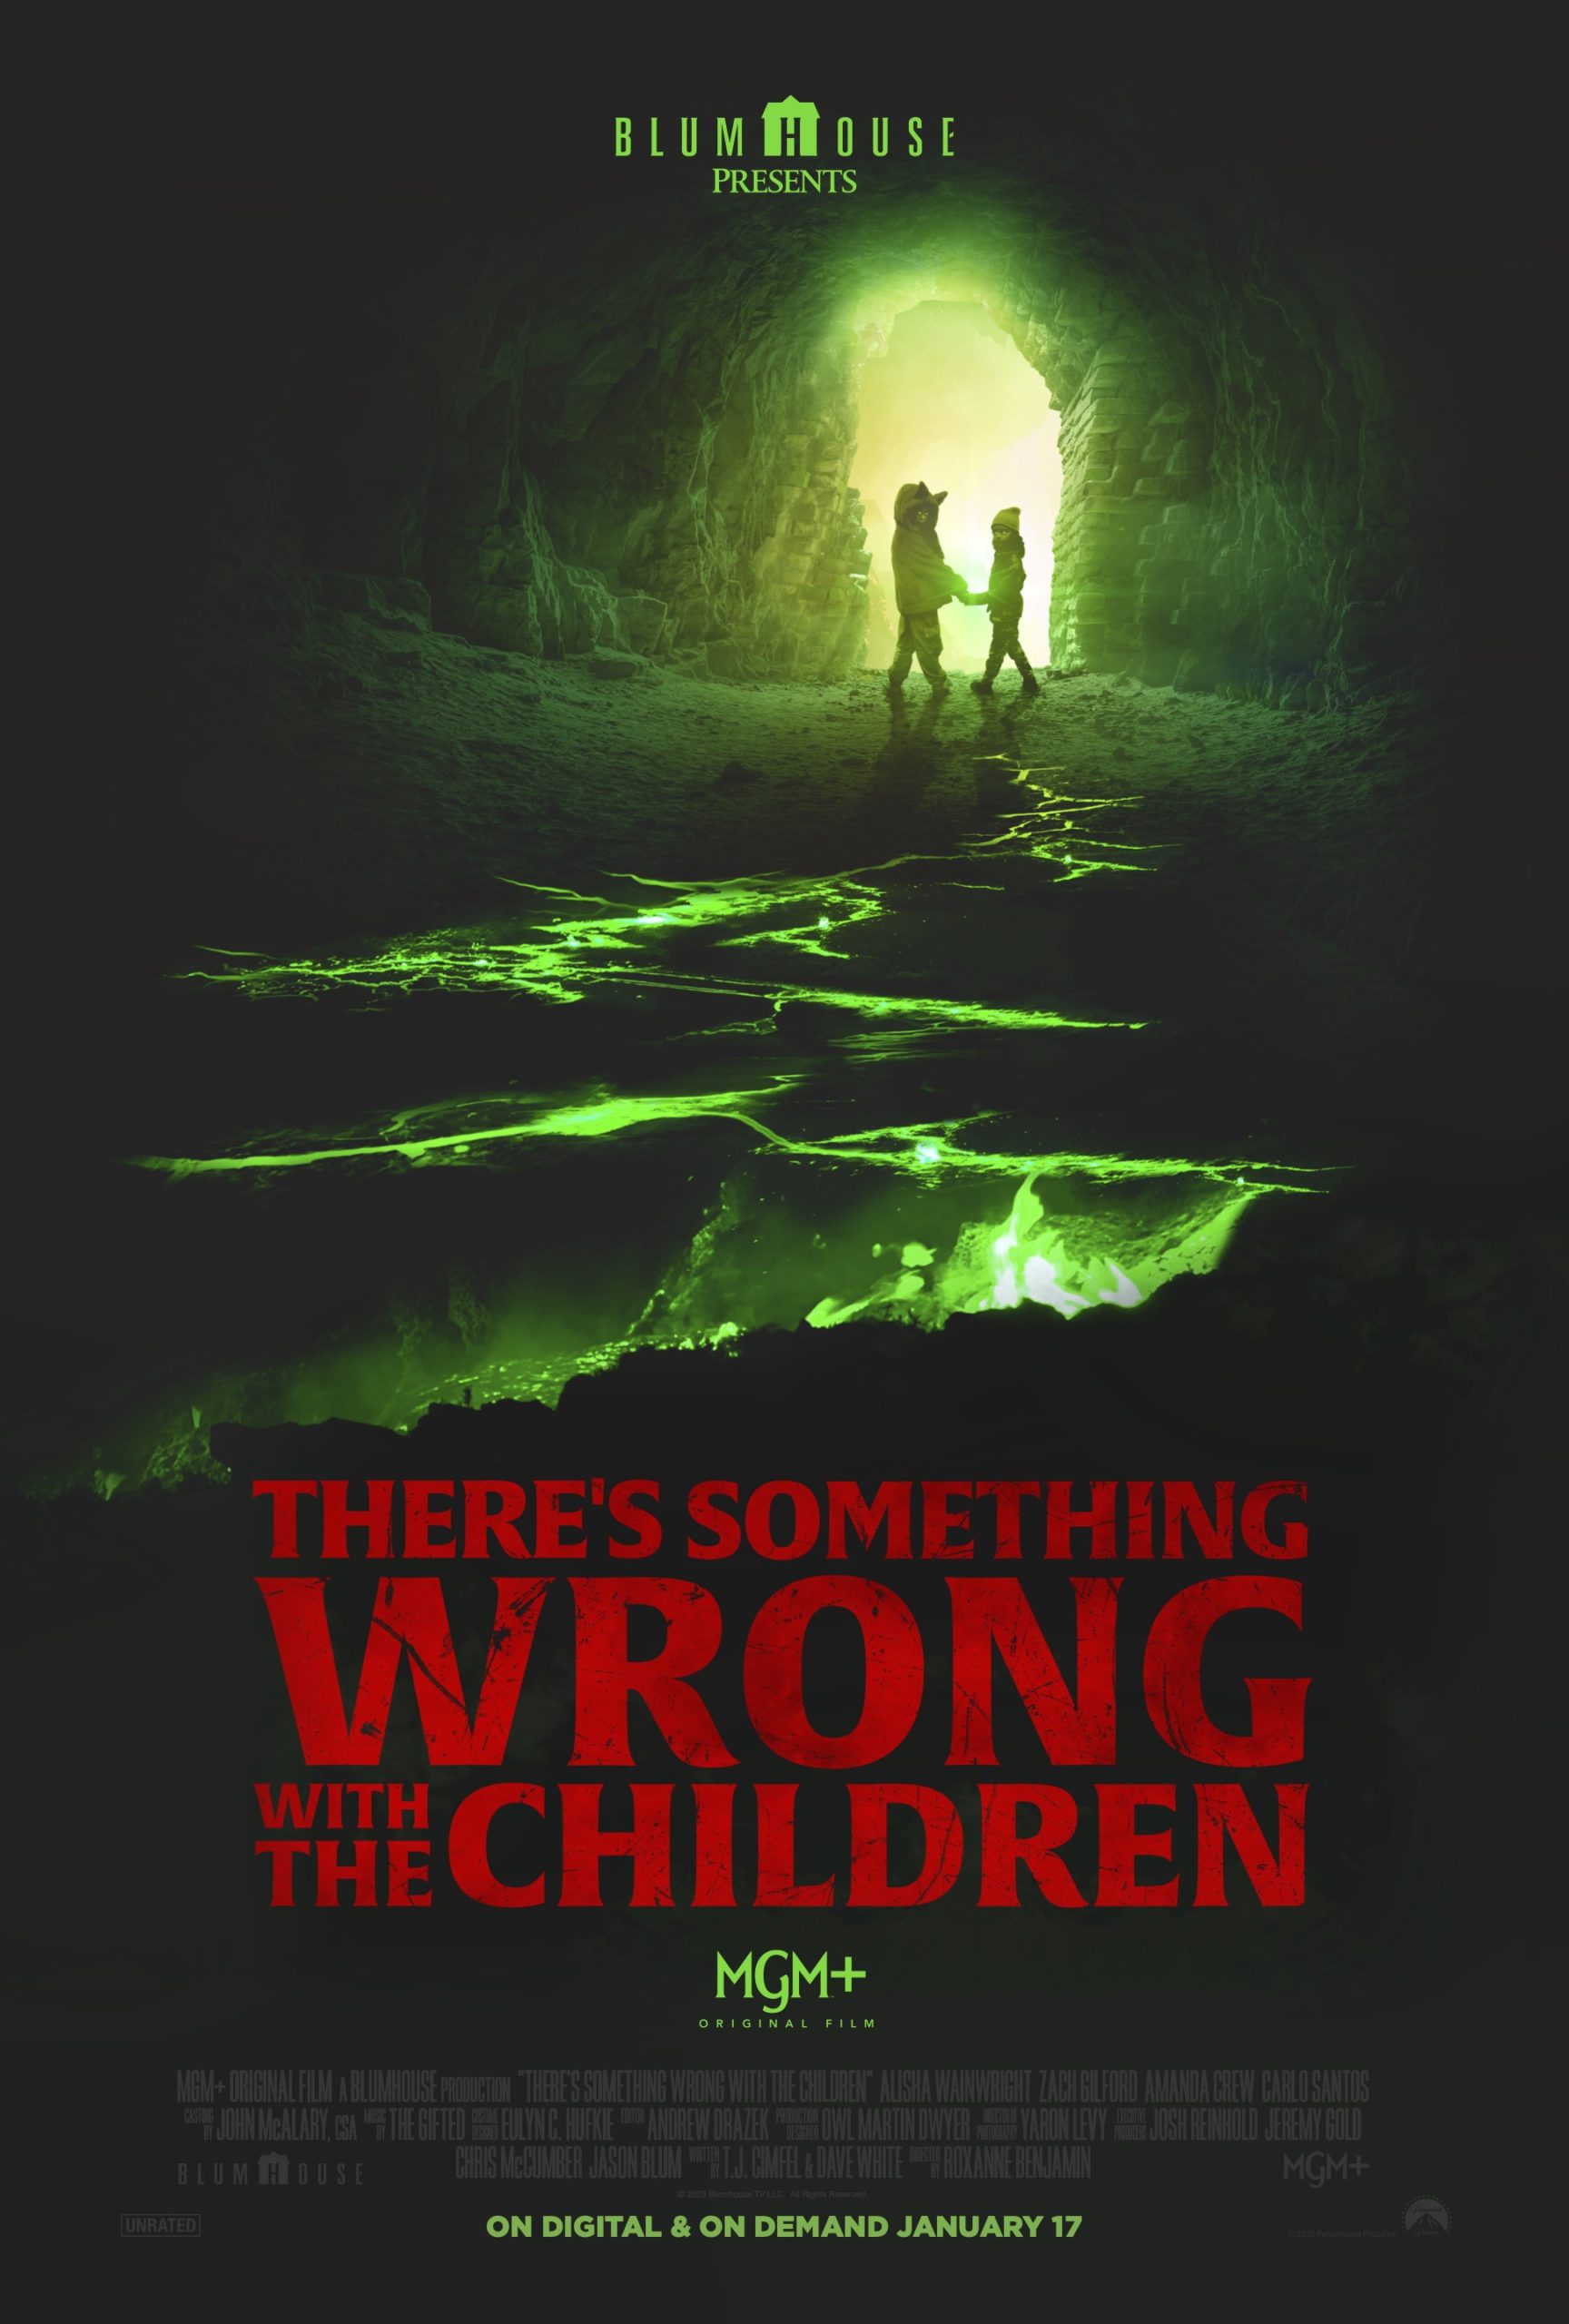 Theres Something Wrong with the Children Trailer & Poster